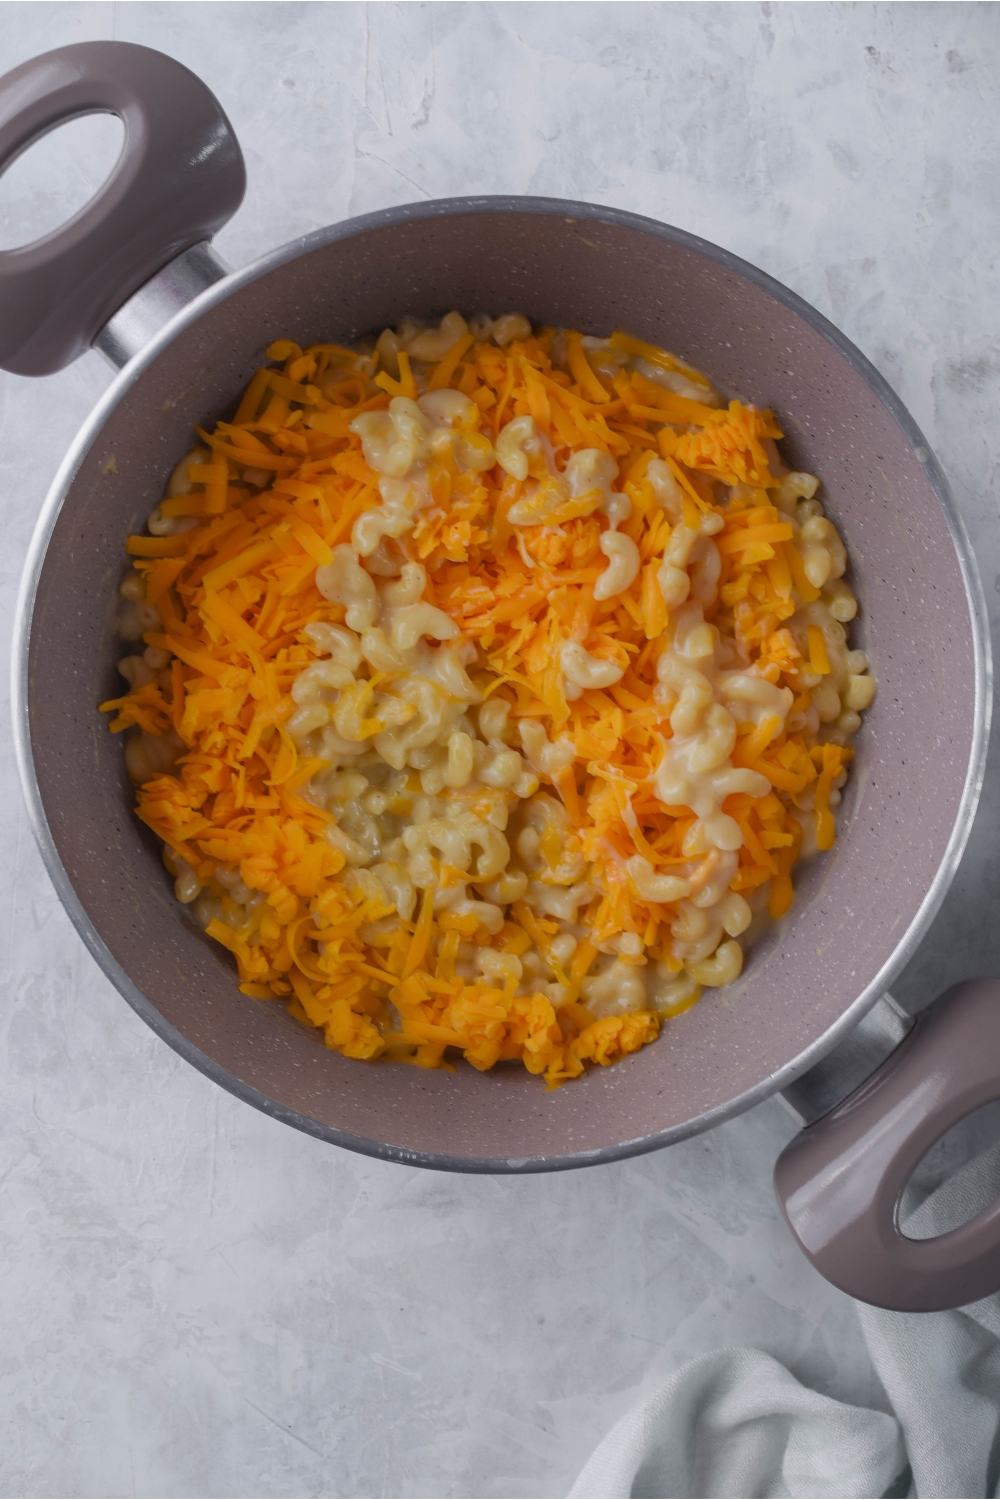 A large pot filled with cooked macaroni noodles in a creamy sauce and shredded cheese sprinkled on top.